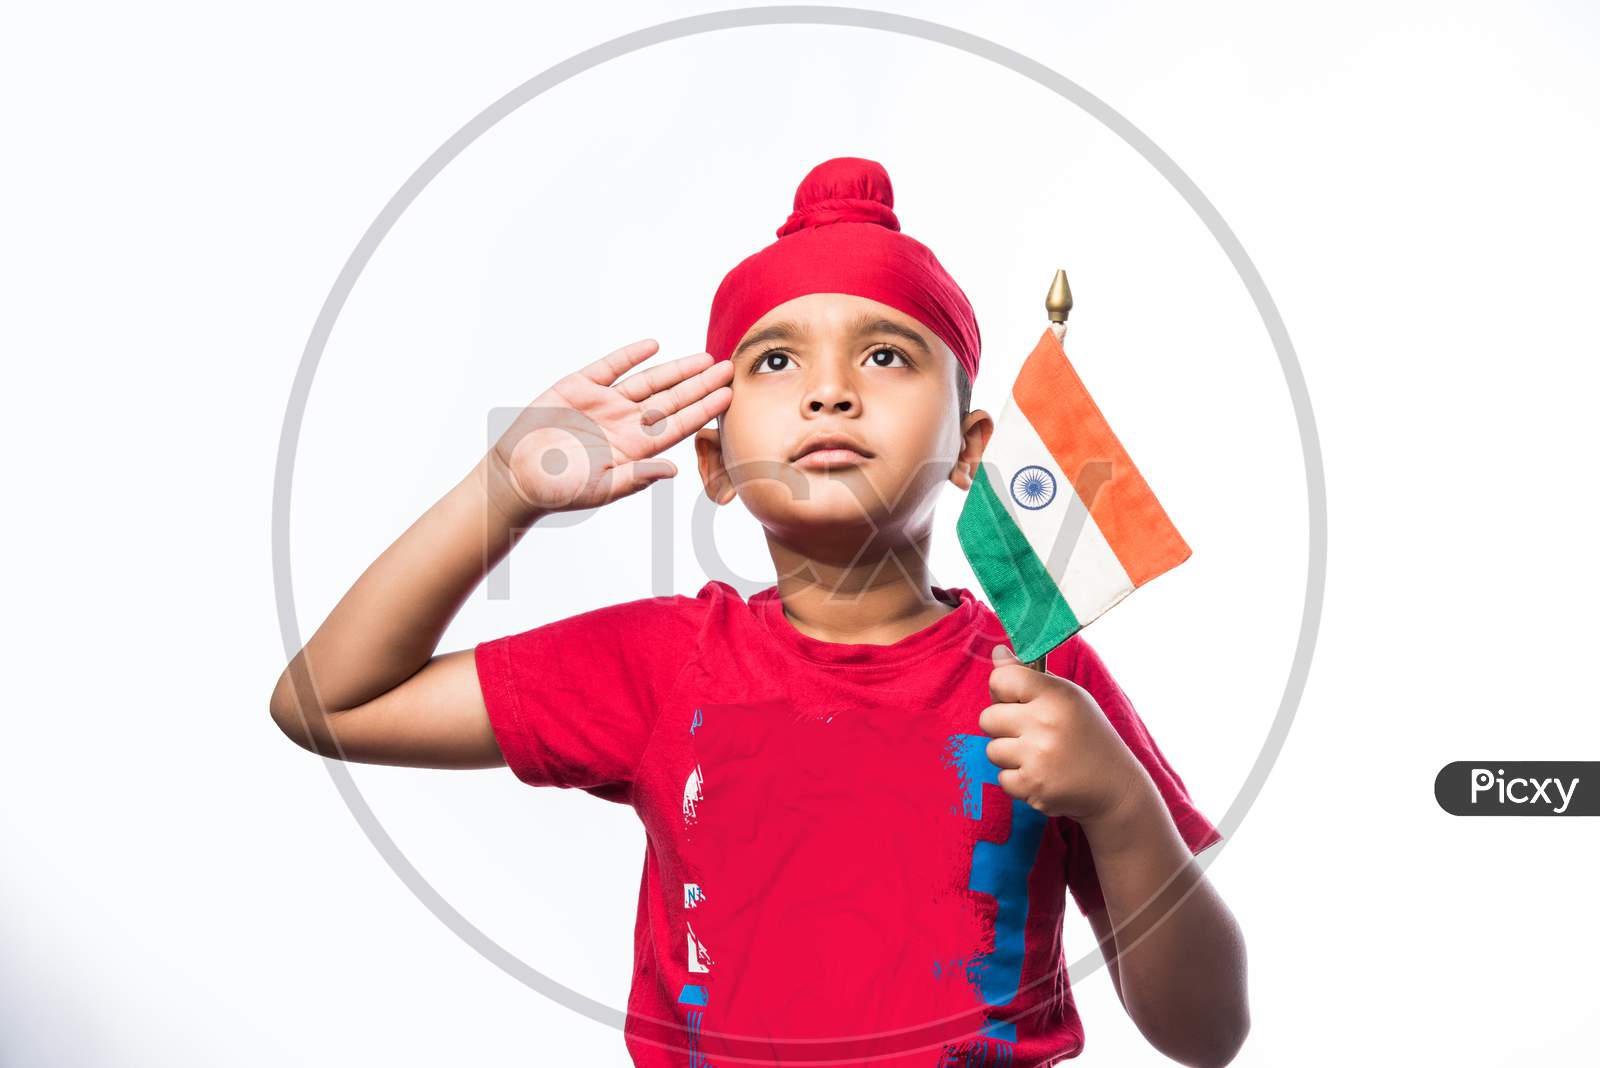 Indian sikh/punjabi little boy holding National Tricolour flag while standing isolated over white background